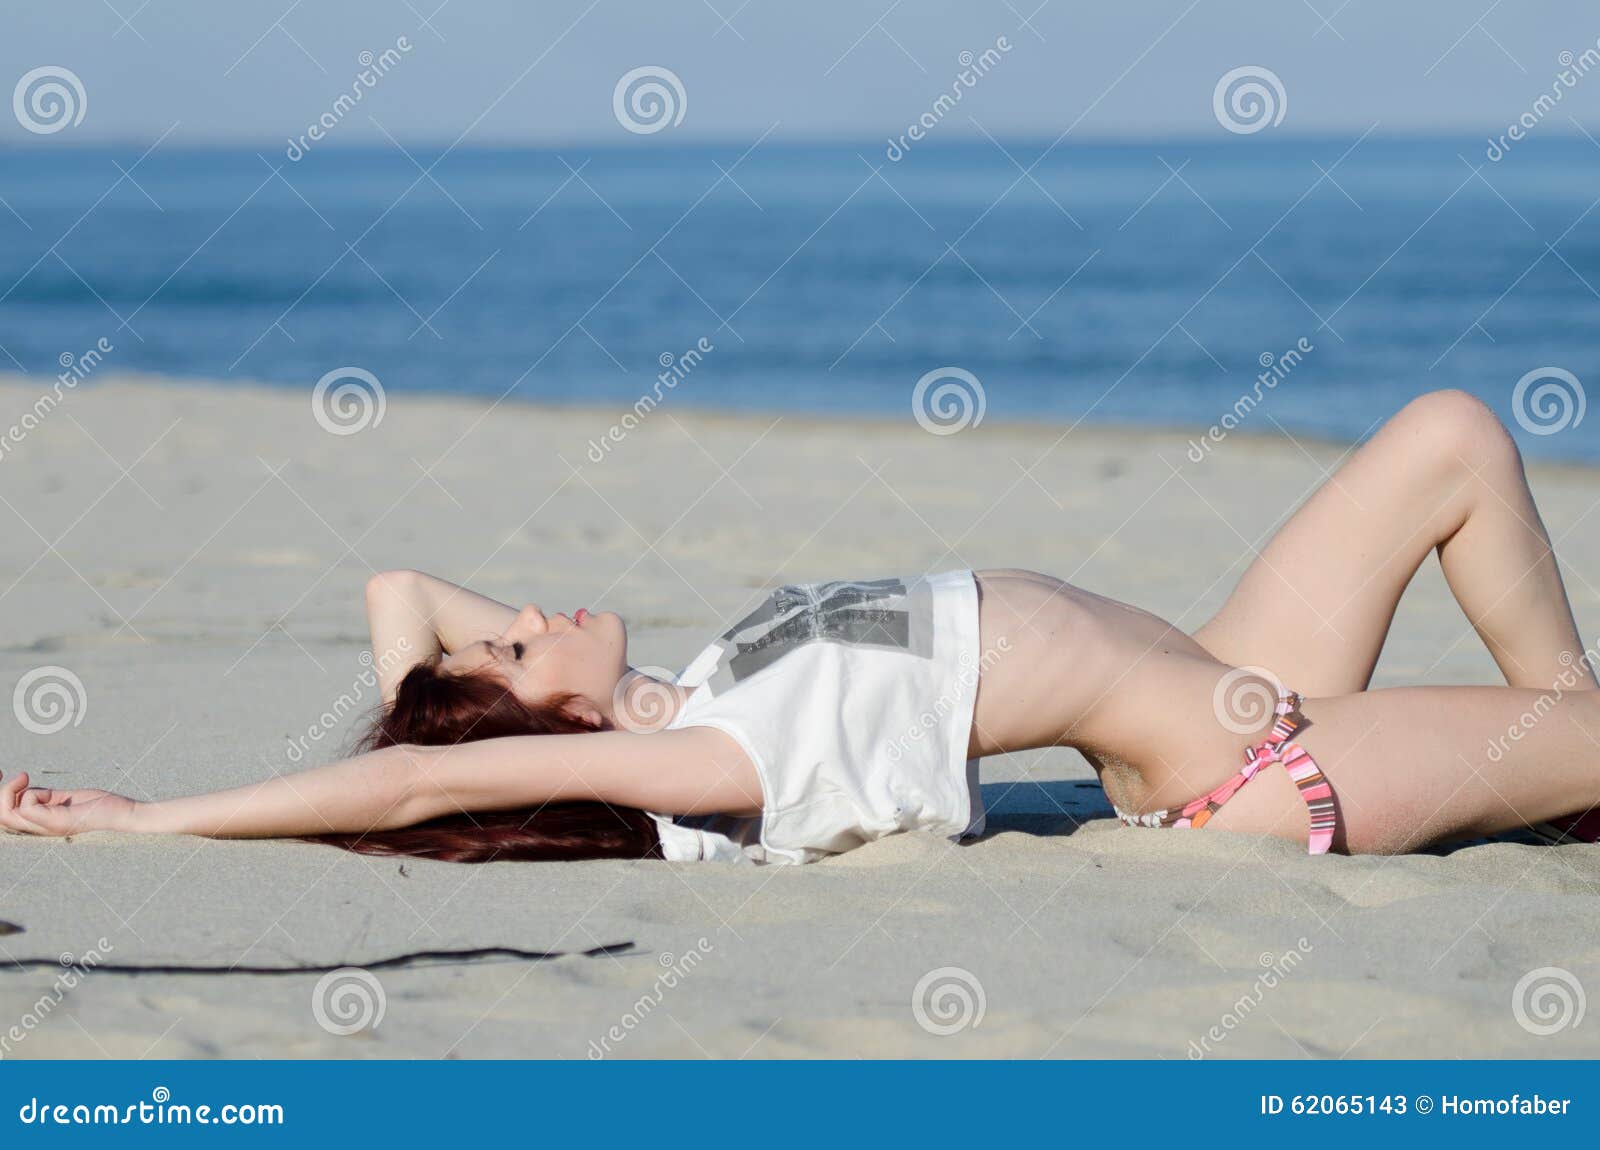 https://thumbs.dreamstime.com/z/slim-young-red-hair-woman-wearing-bottom-bikini-shirt-flaunt-her-attractive-body-playful-sexy-poses-as-lie-sandy-62065143.jpg